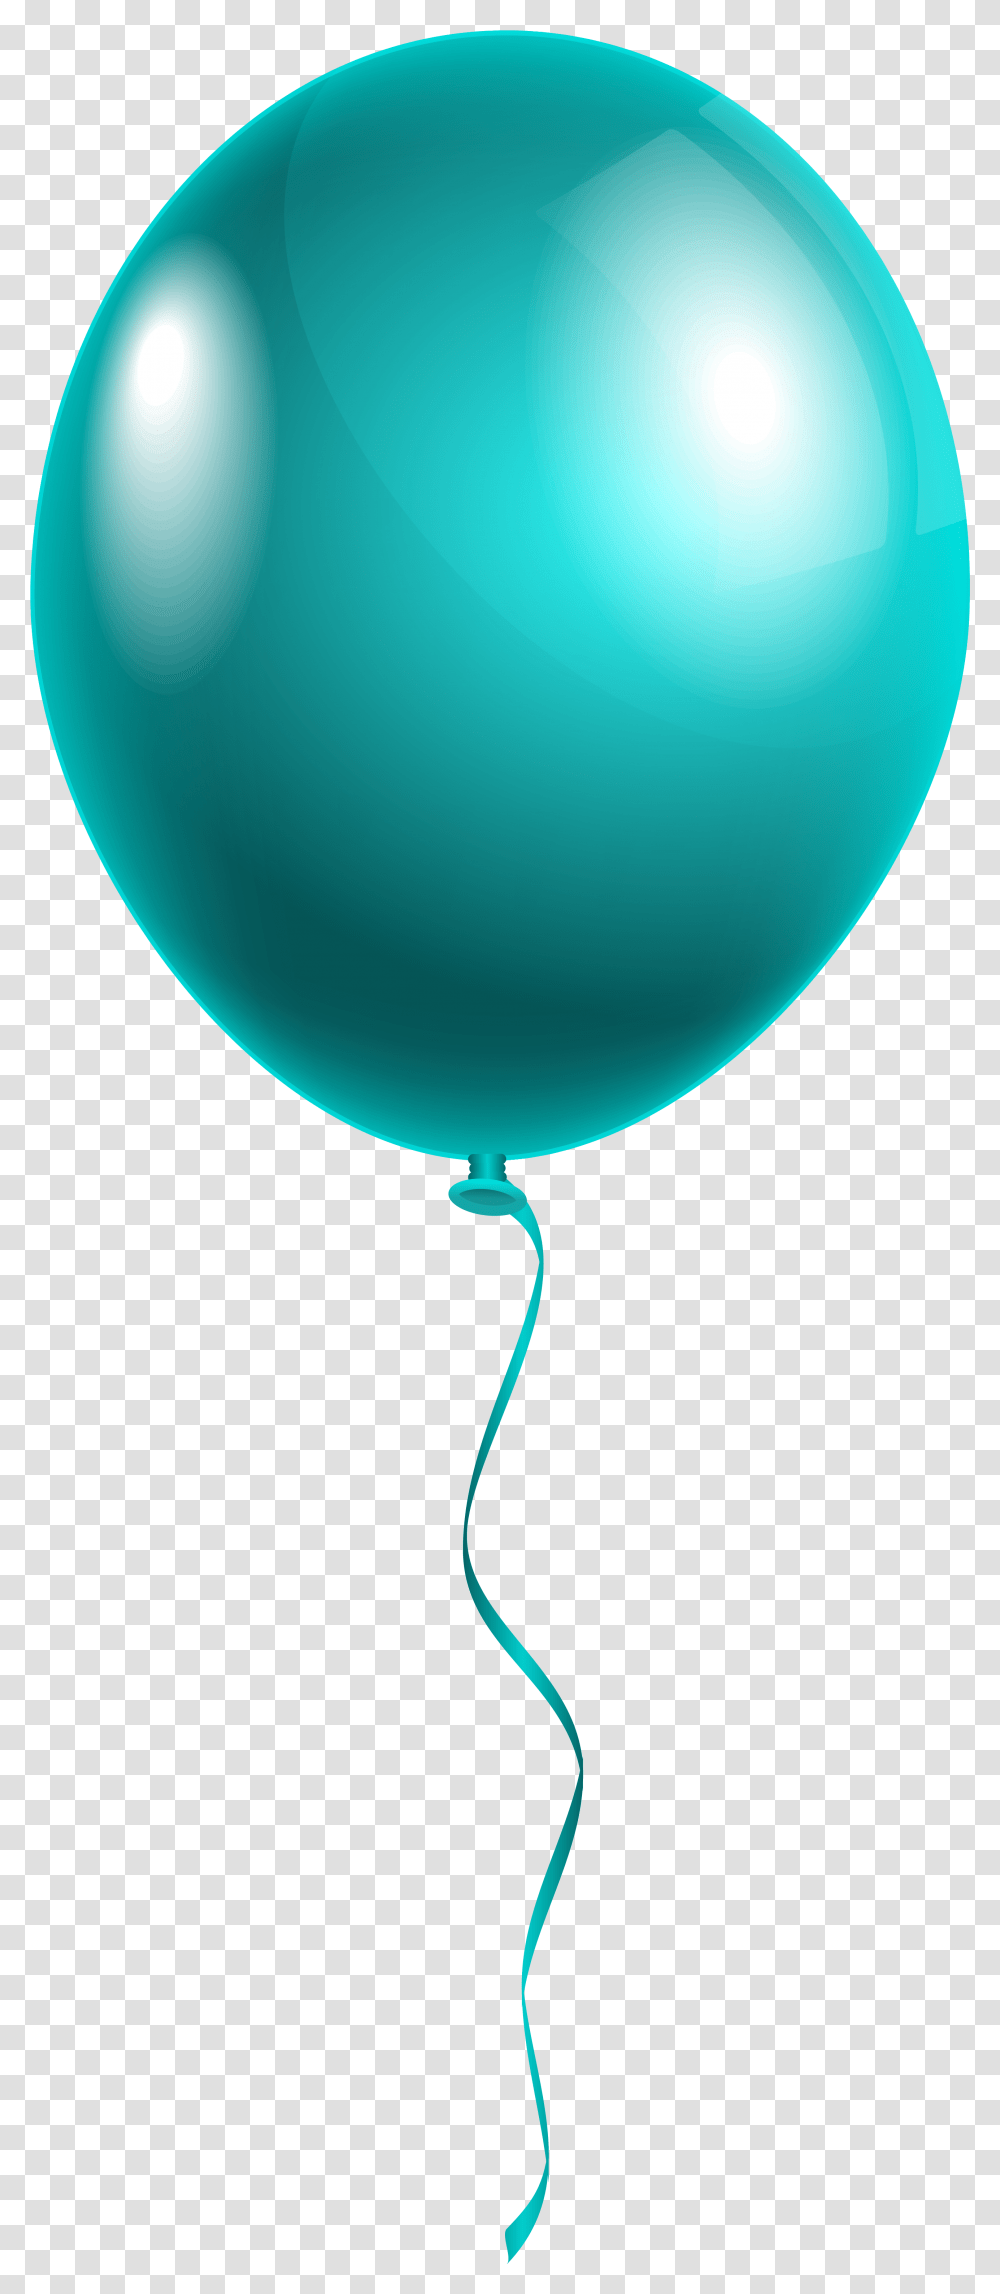 Library Of Star Balloons Image Freeuse Single Balloons Transparent Png